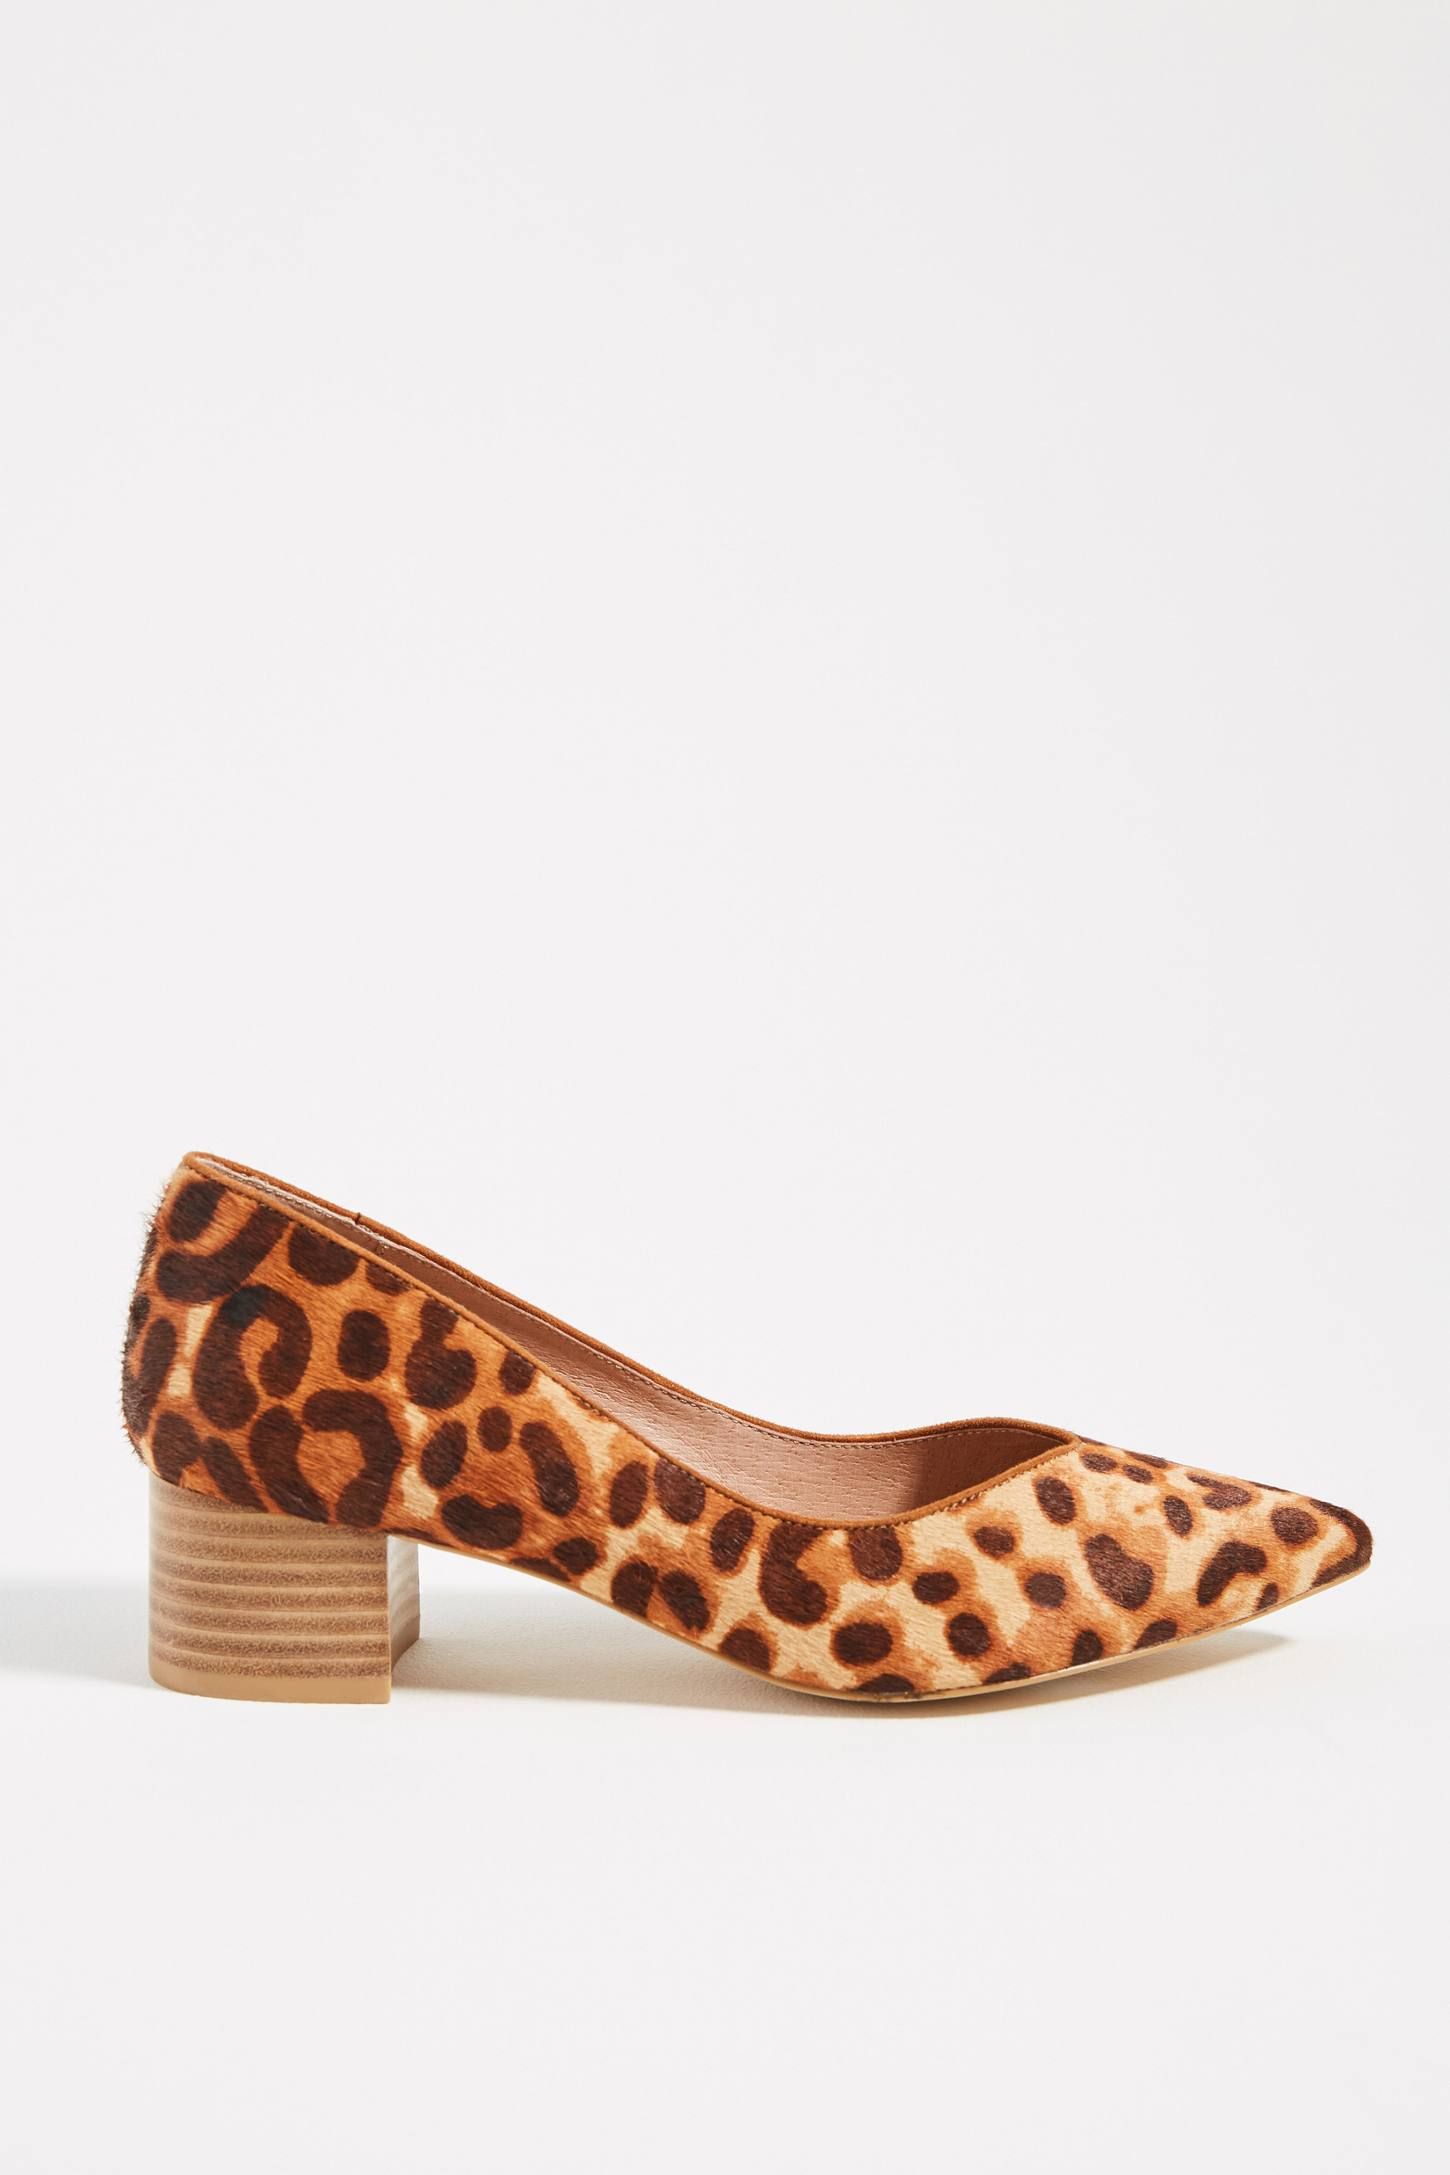 anthropologie sale shoes